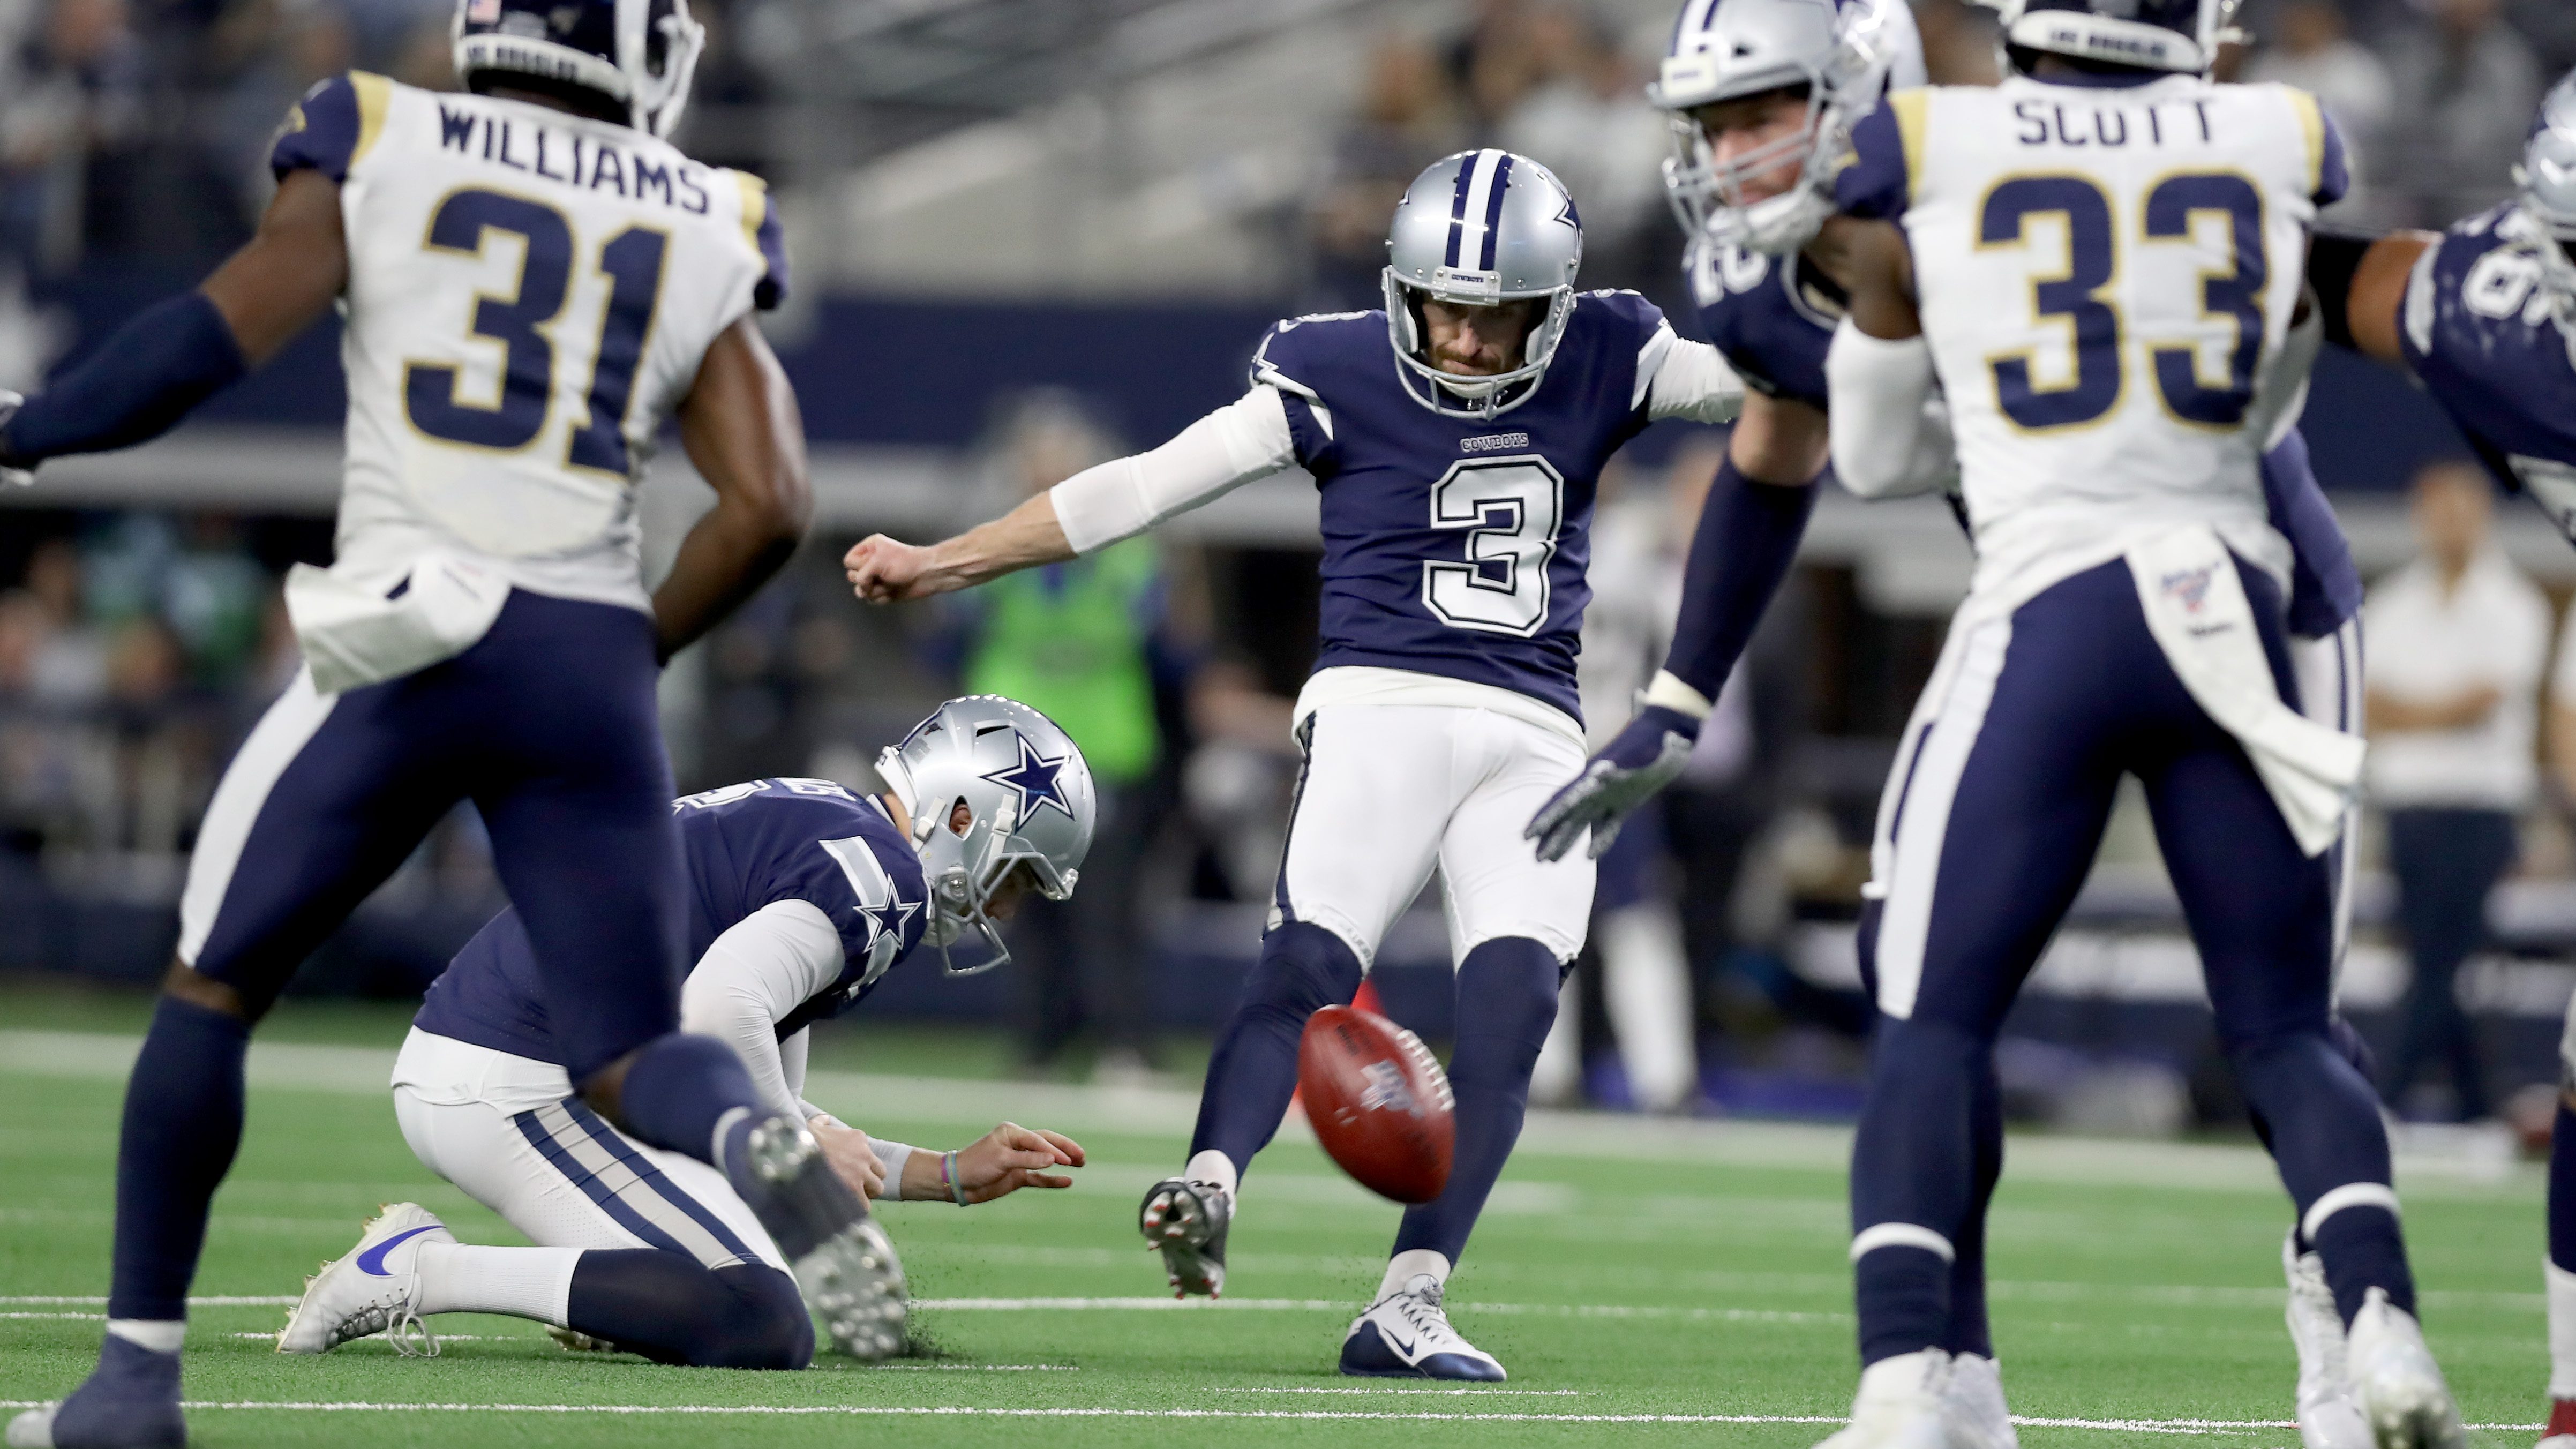 Cowboys Reach Agreement With Starting Kicker for 2020 Season